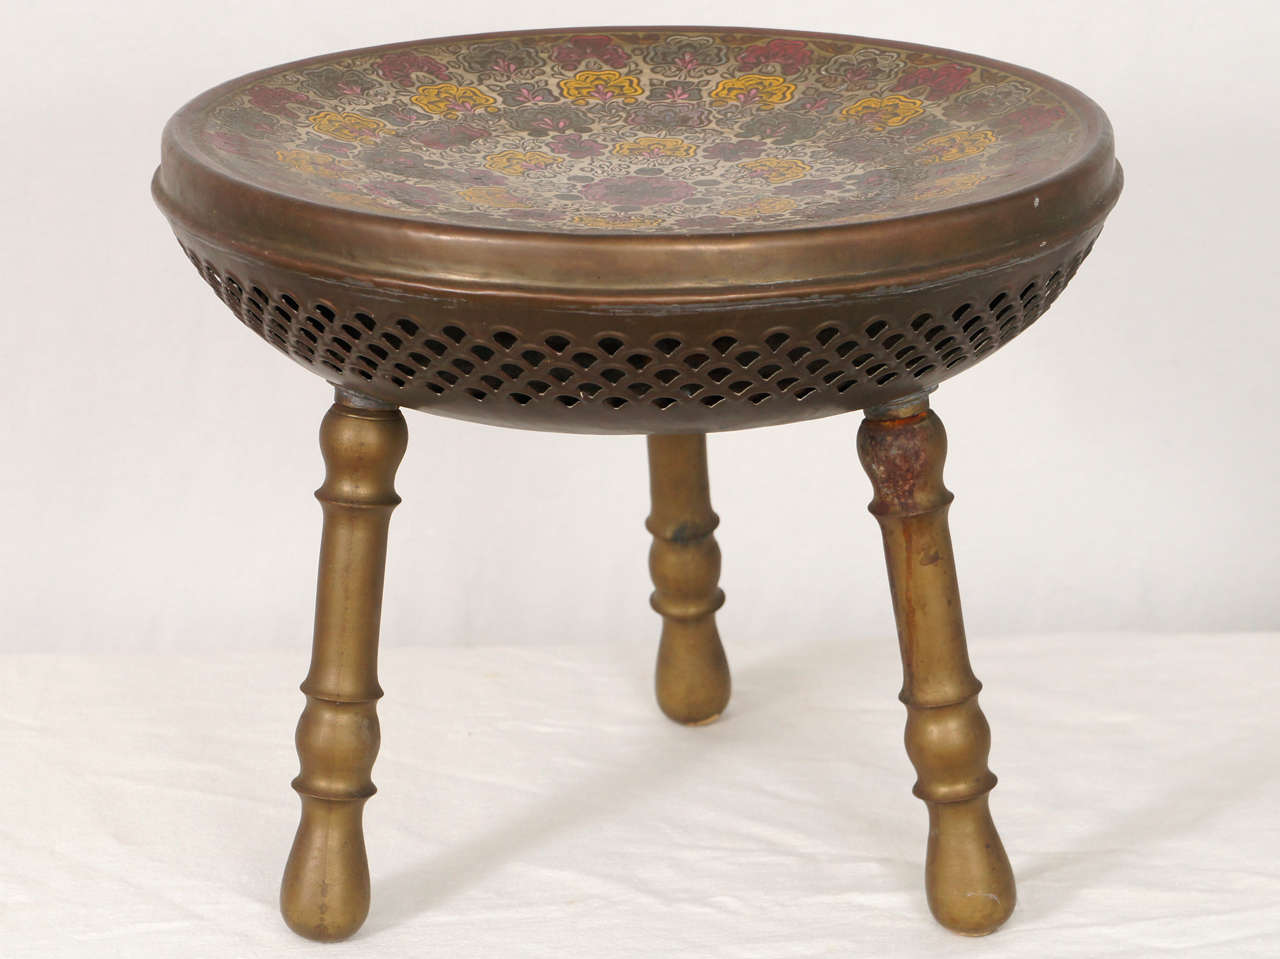 A very nice antique bronze stool with an etched seat and acrylic coloring. these stools were designed as warmers for your feet or seat. however, they are mostly used as decoration.
wonderful clean condition with an aged patina.